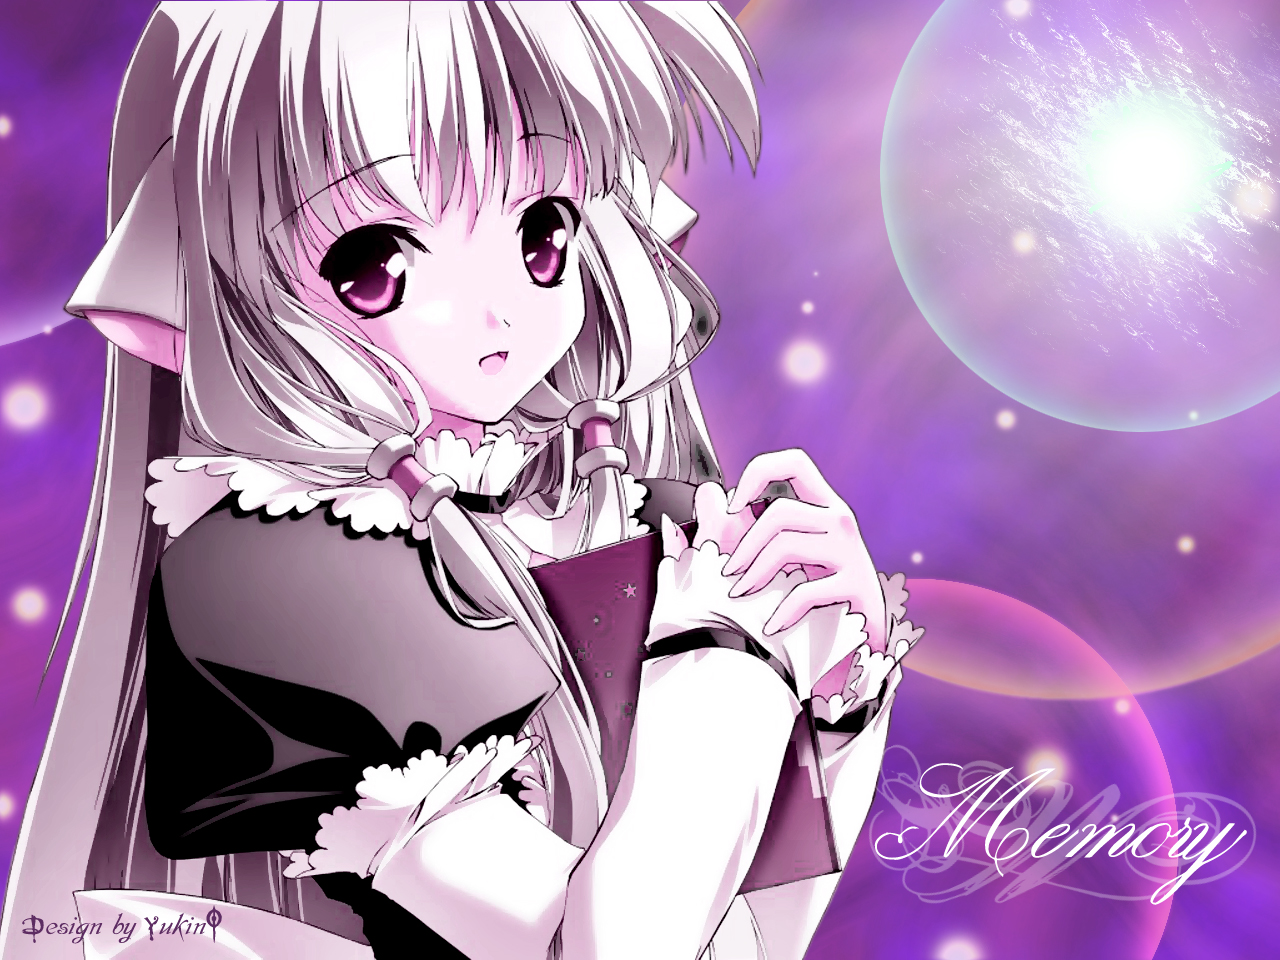 Chobits Picture